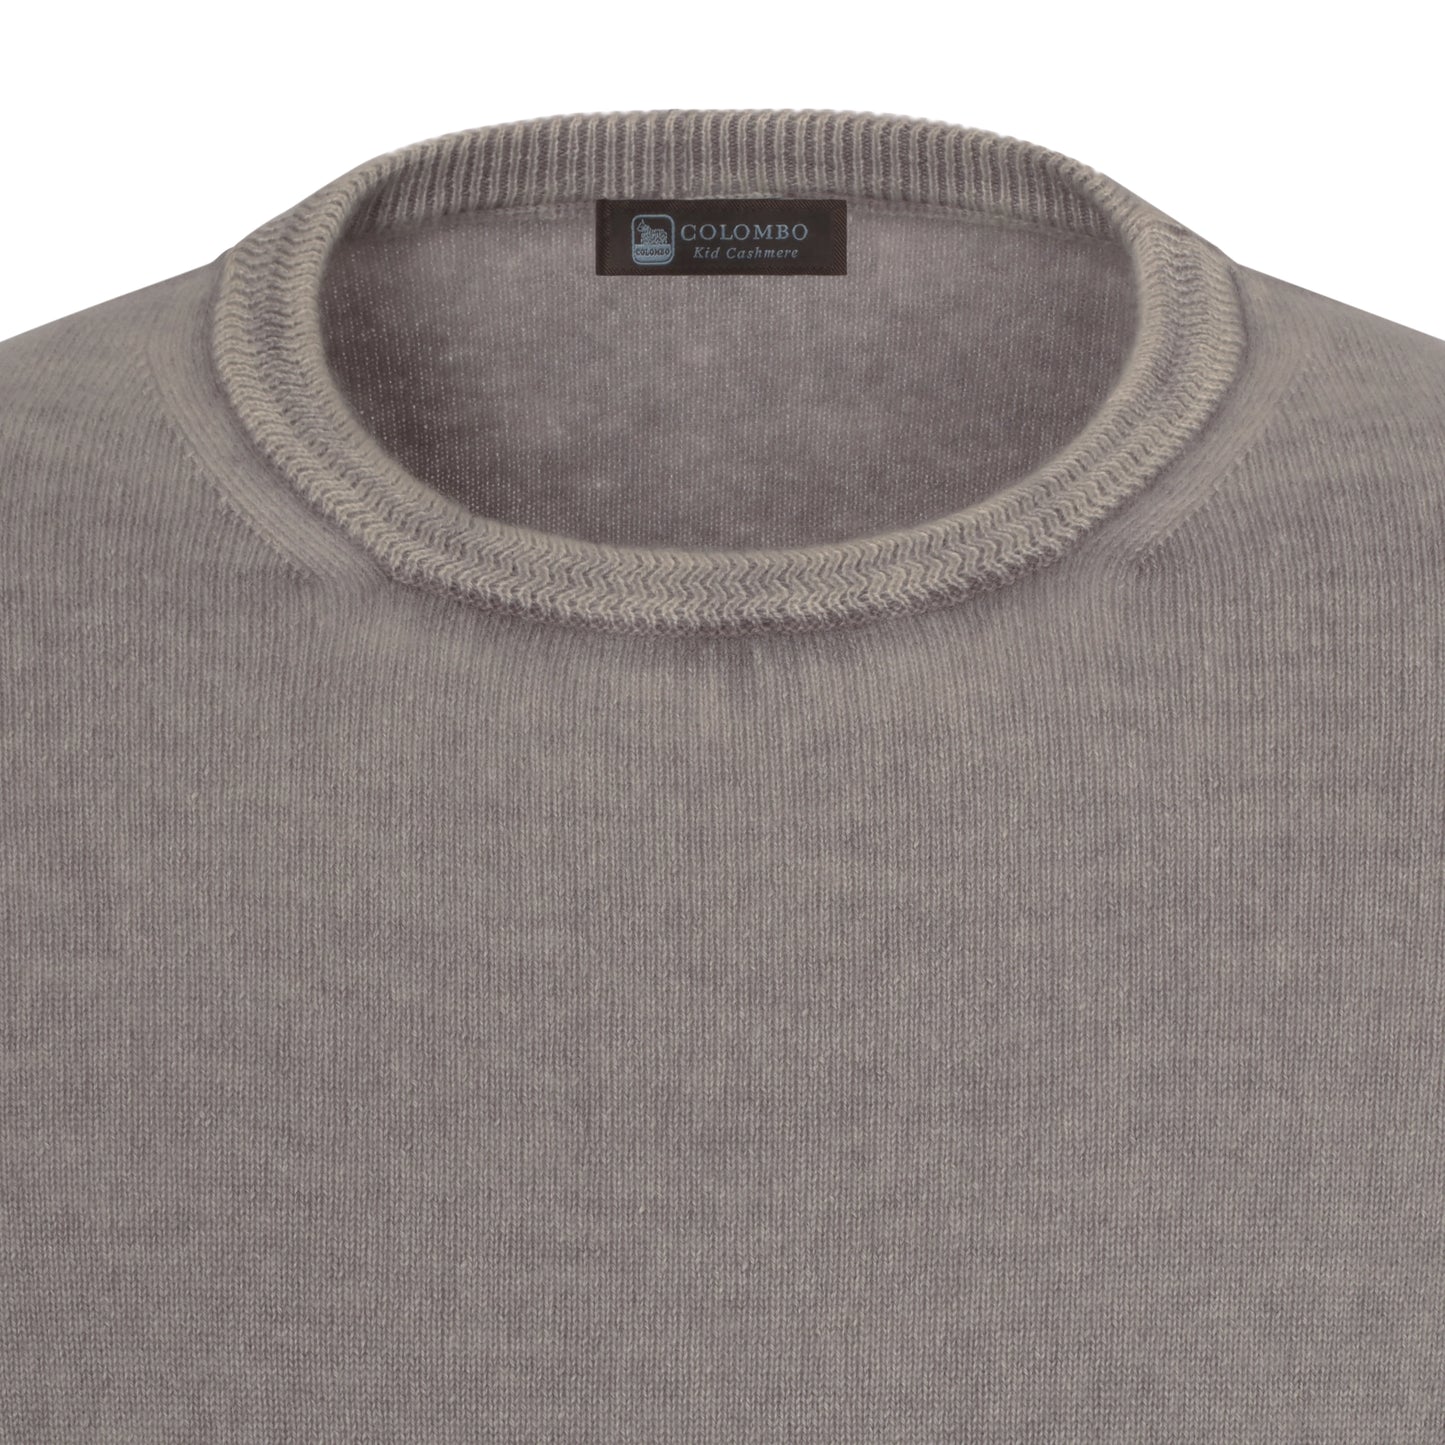 Crew-Neck Cashmere Pullover in Cool Grey